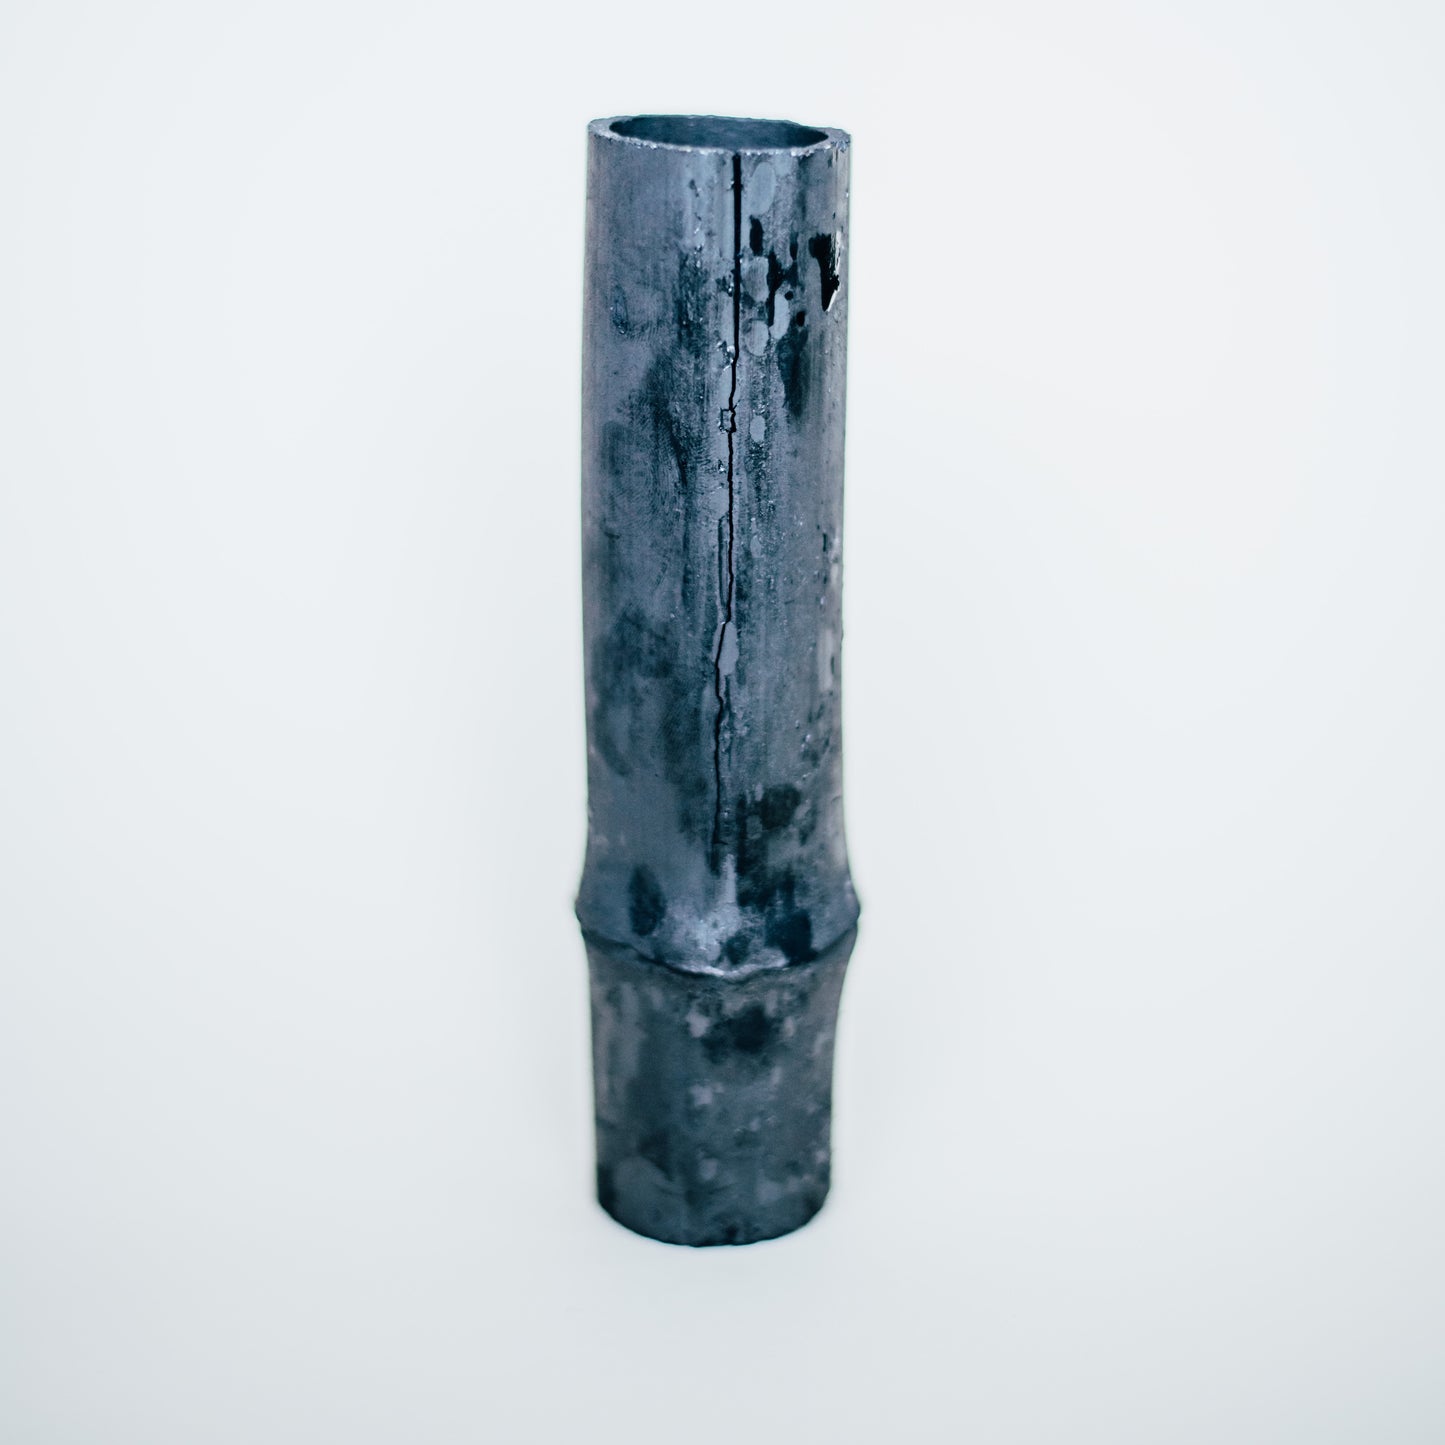 Charcoal water filter on white background